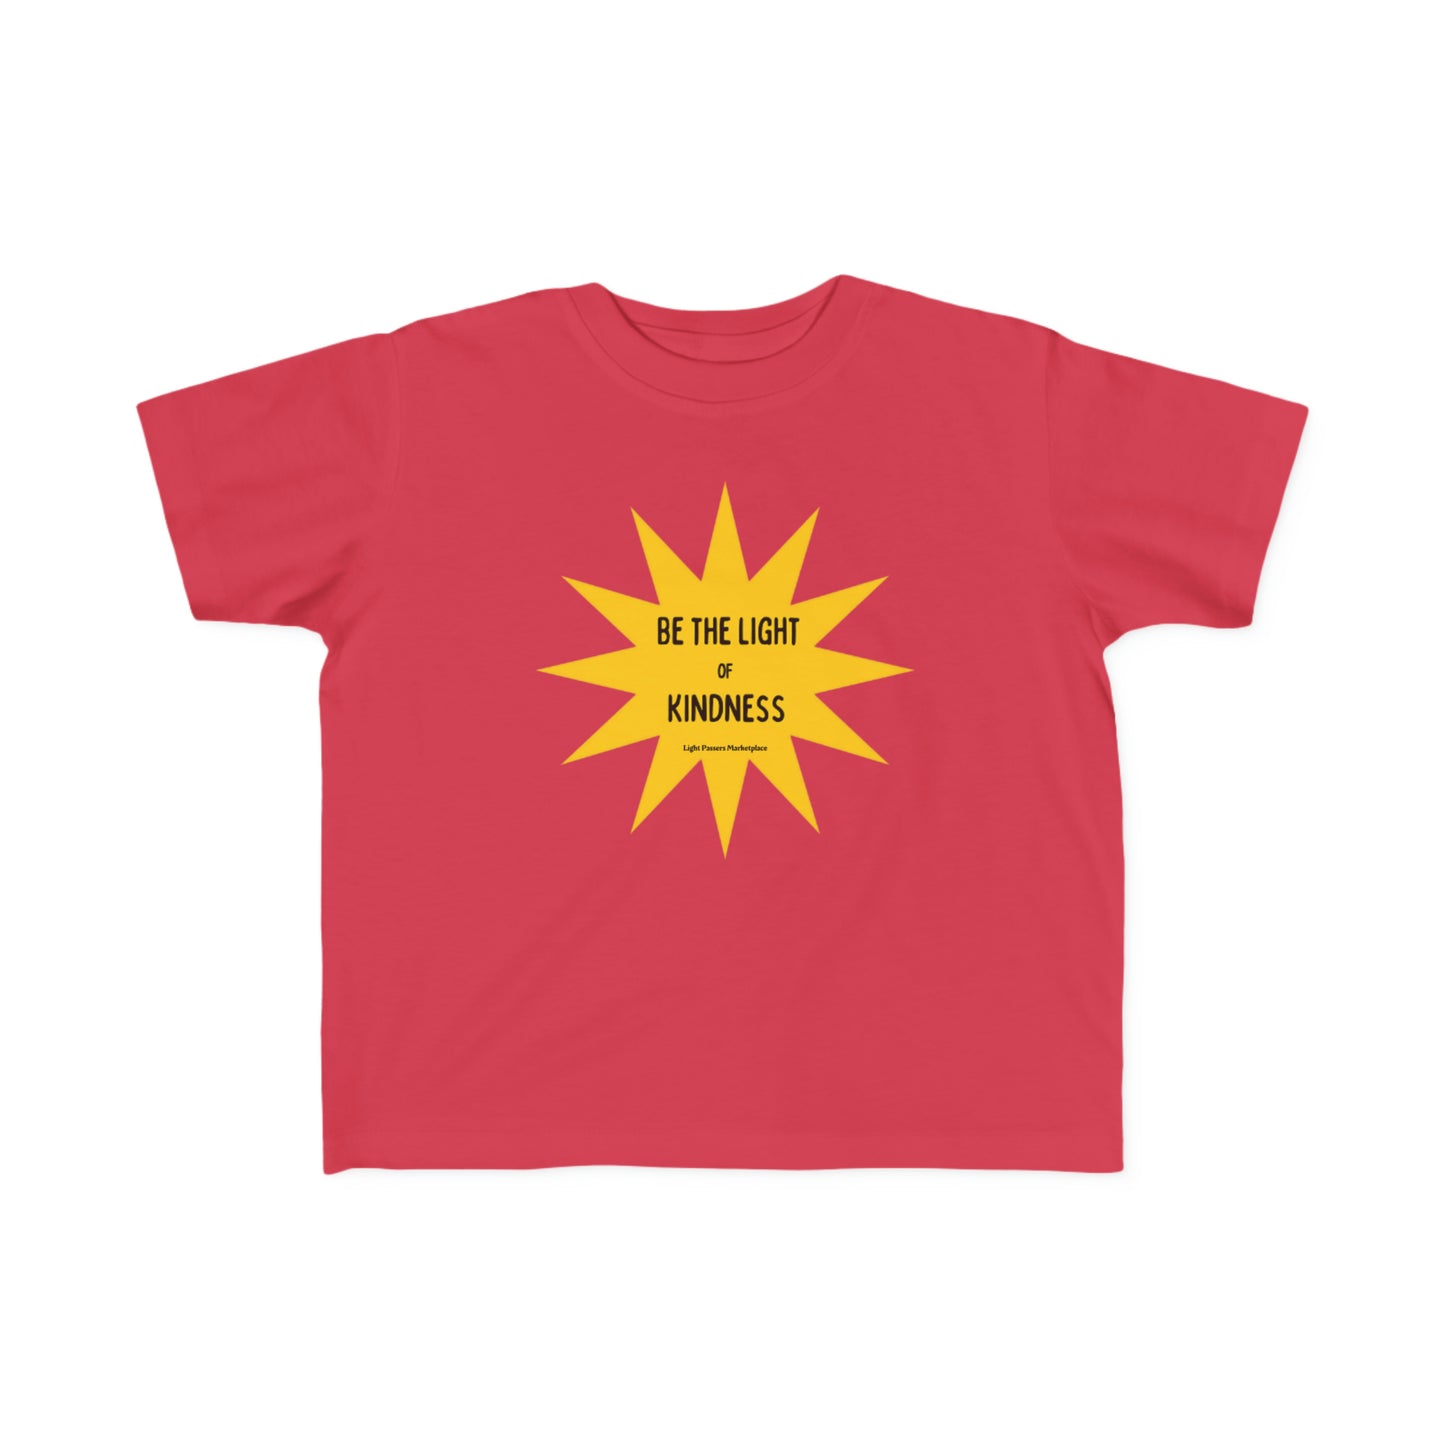 A toddler tee featuring a yellow star with black text, ideal for sensitive skin. Made of 100% combed, ring-spun cotton, light fabric, tear-away label, and a classic fit.